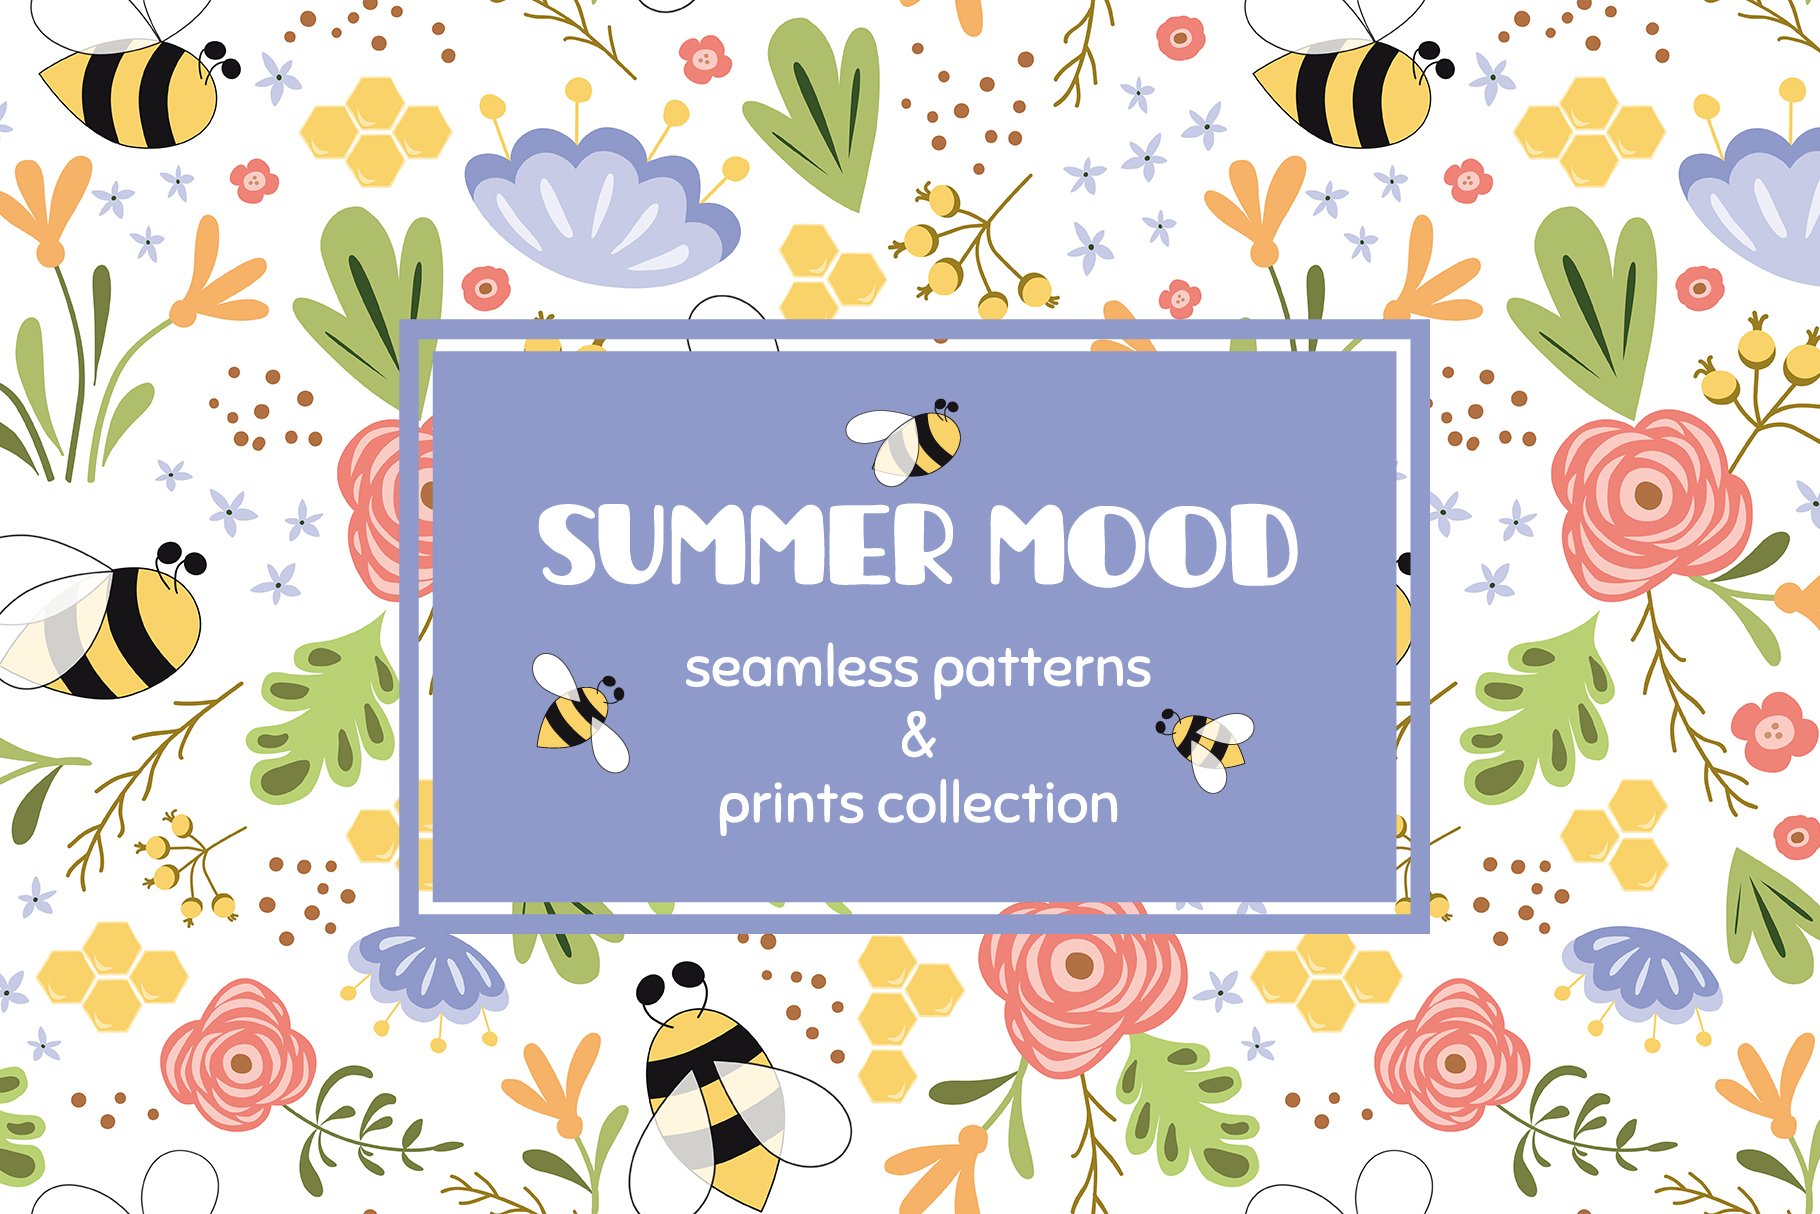 Summer Bee Patterns & Elements cover image.